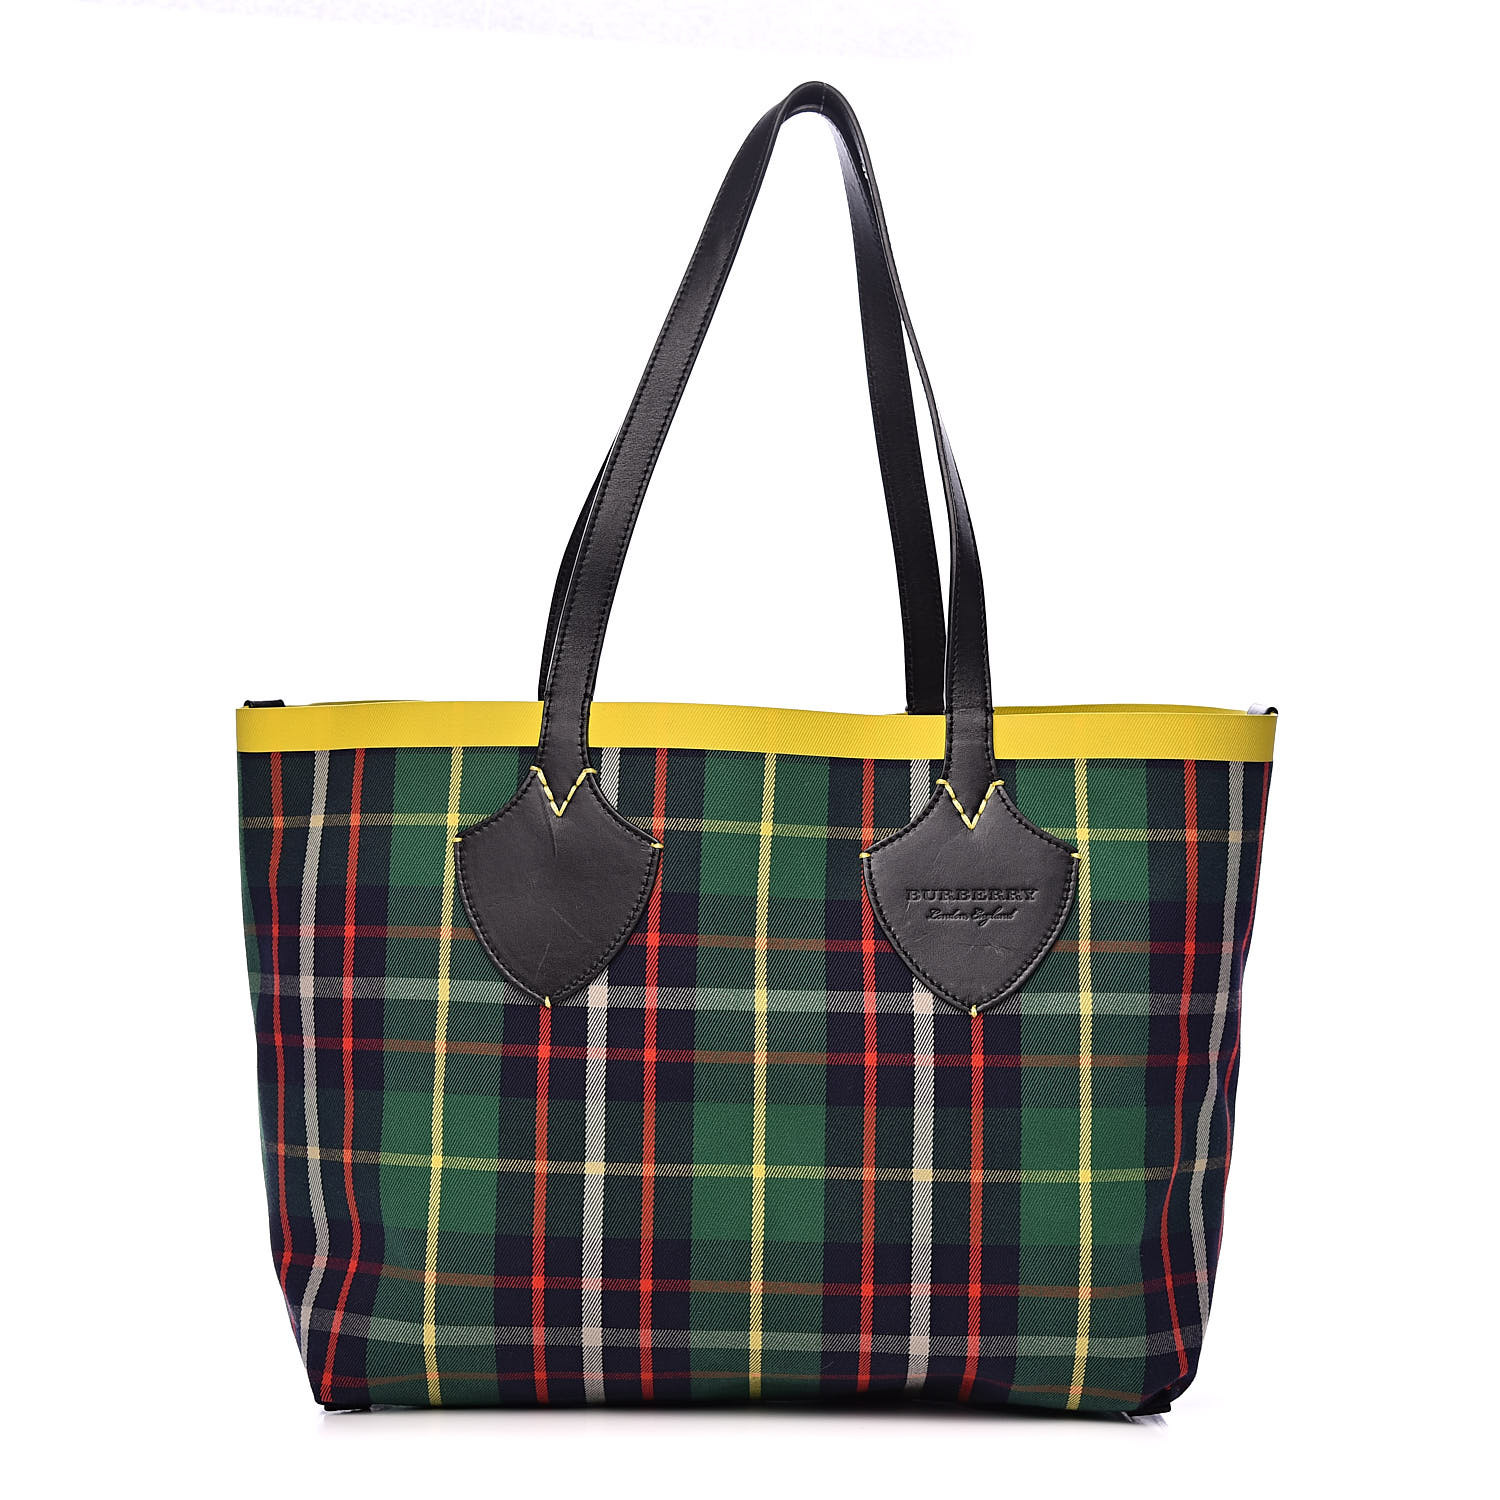 burberry the giant tote